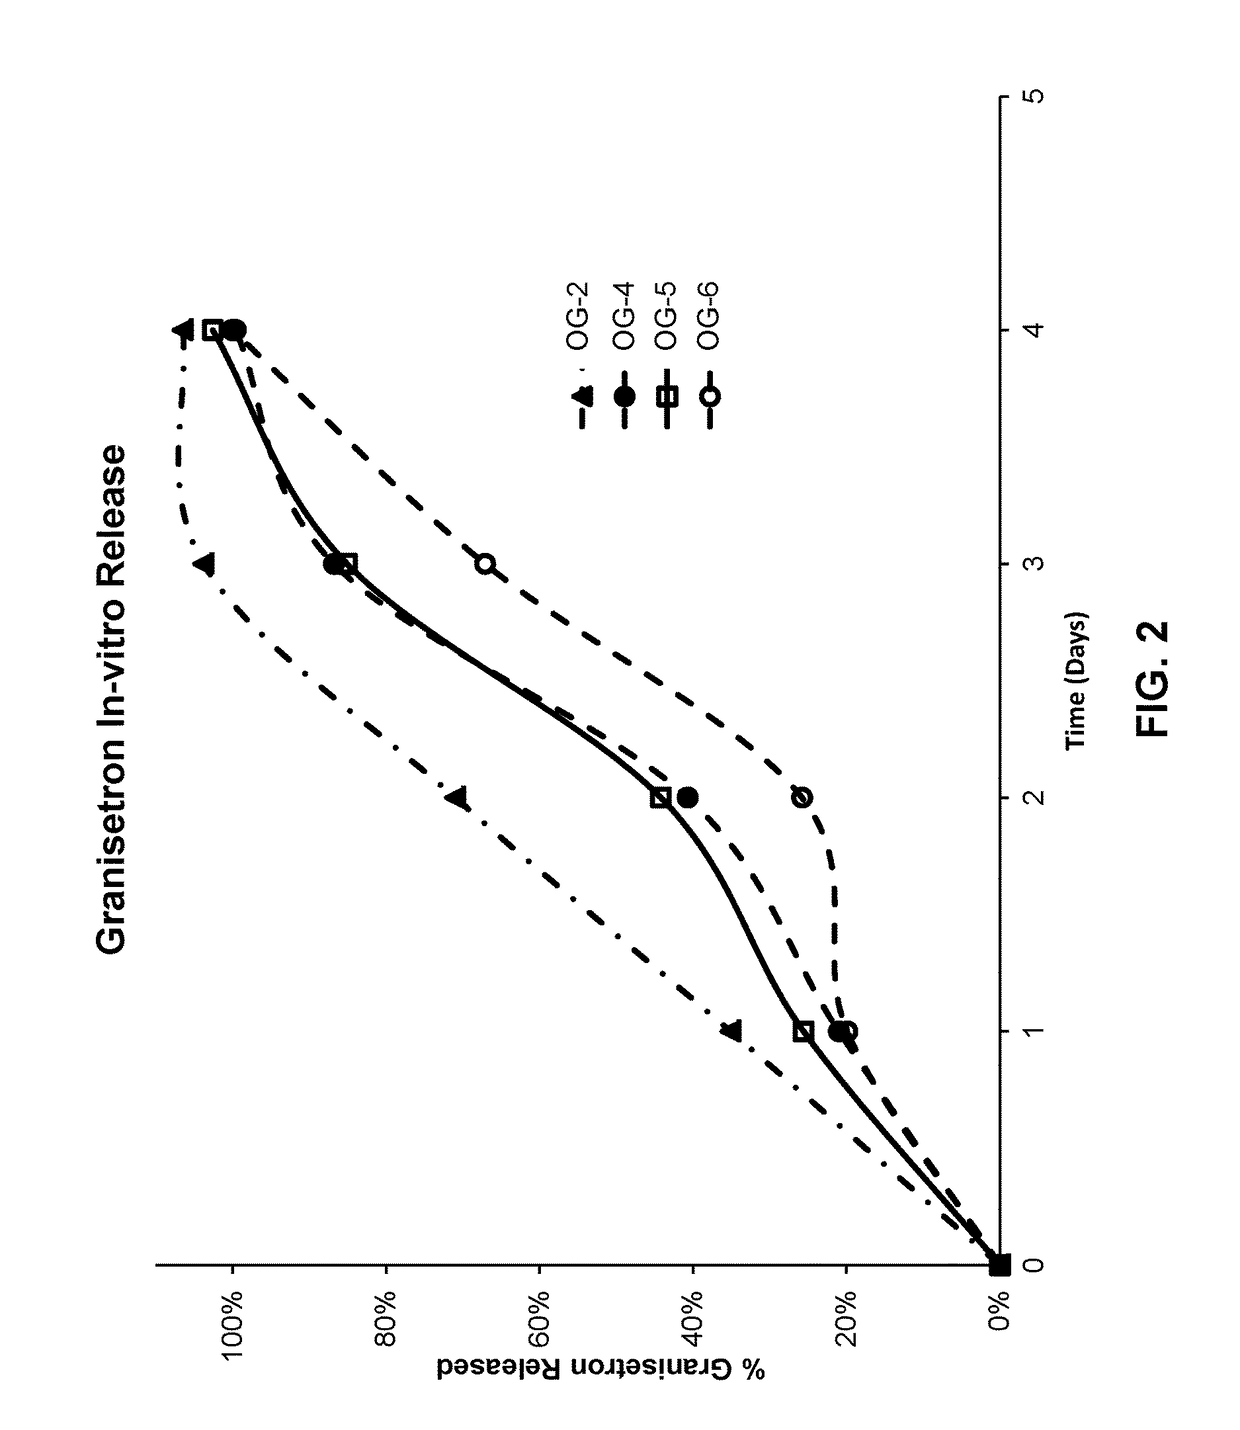 Long-acting polymeric delivery systems comprising olanzapine and a 5-ht3 receptor antagonist